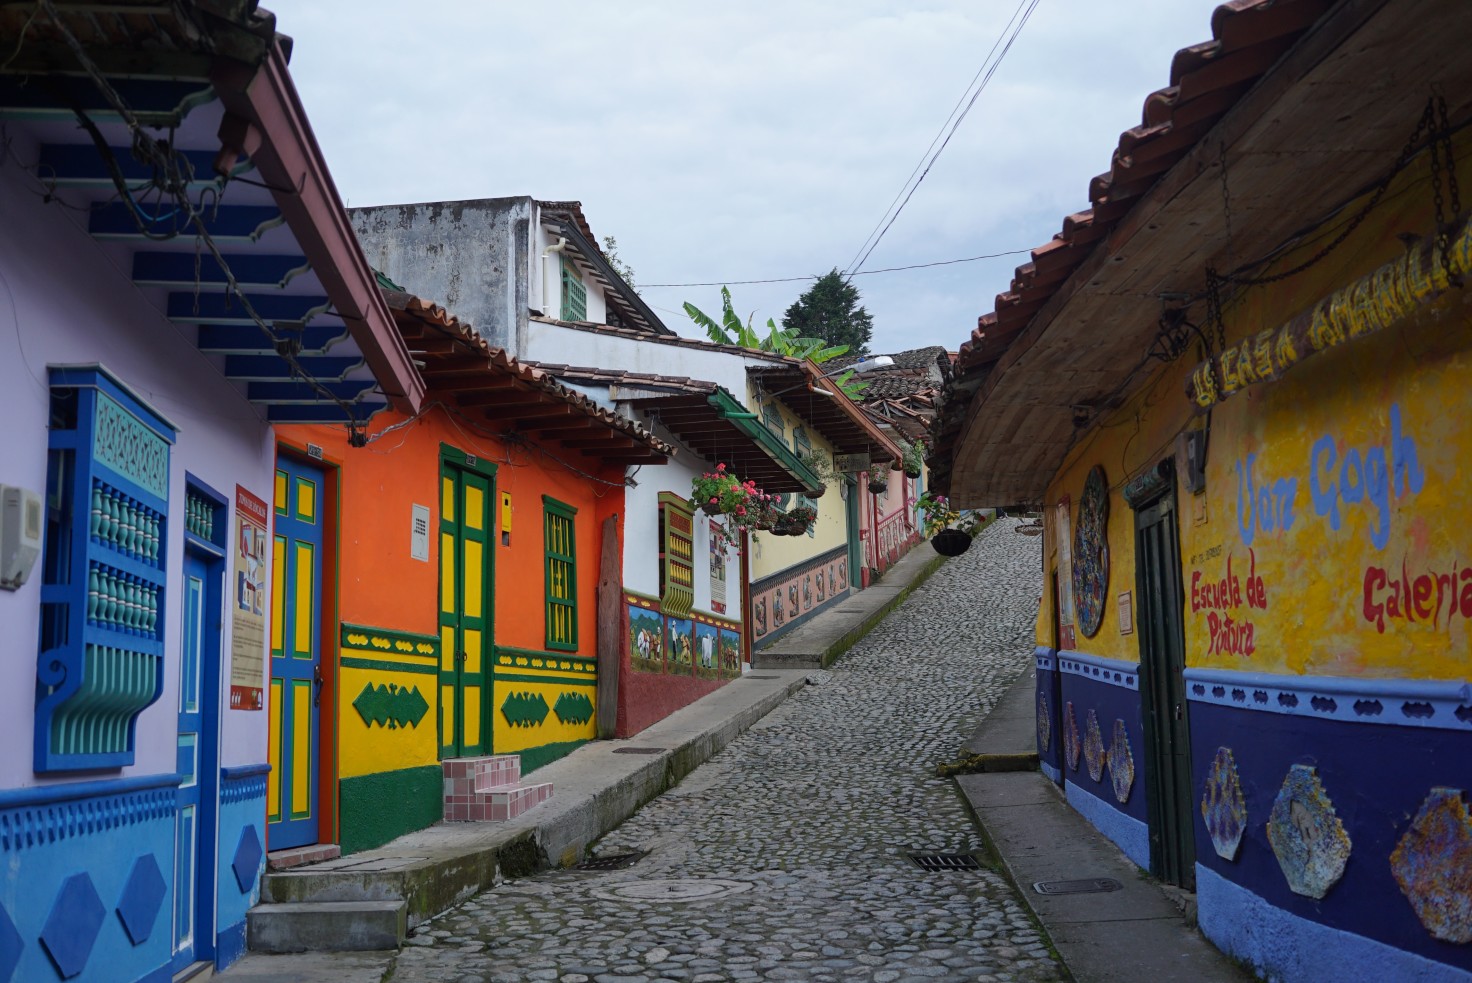 Cobblestone street lined with small buildings with colorful walls